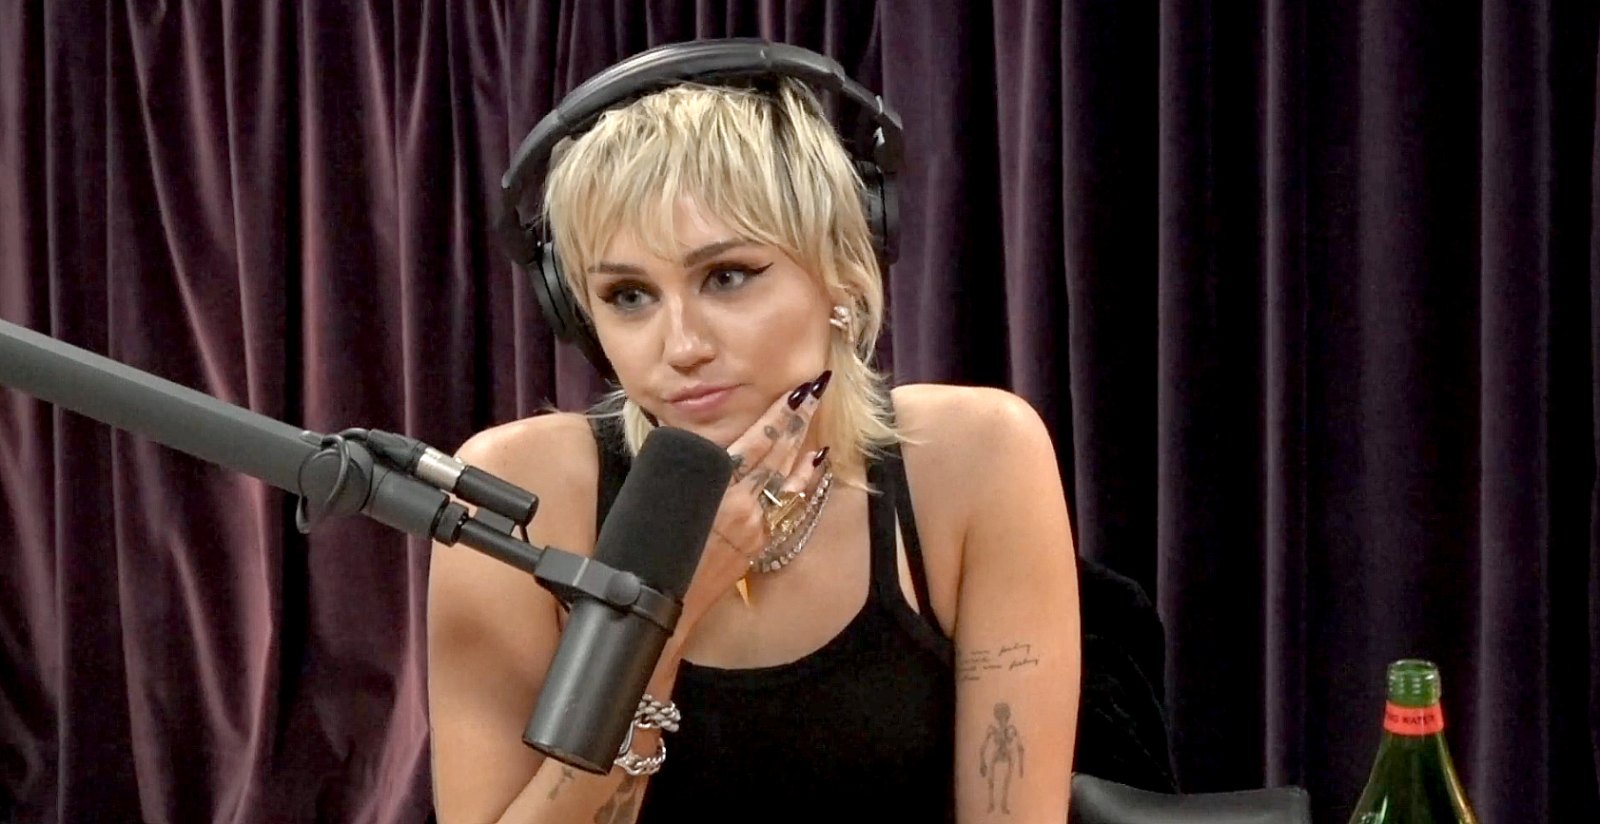 Miley Cyrus Details Divorce Sobriety and More in New Interview